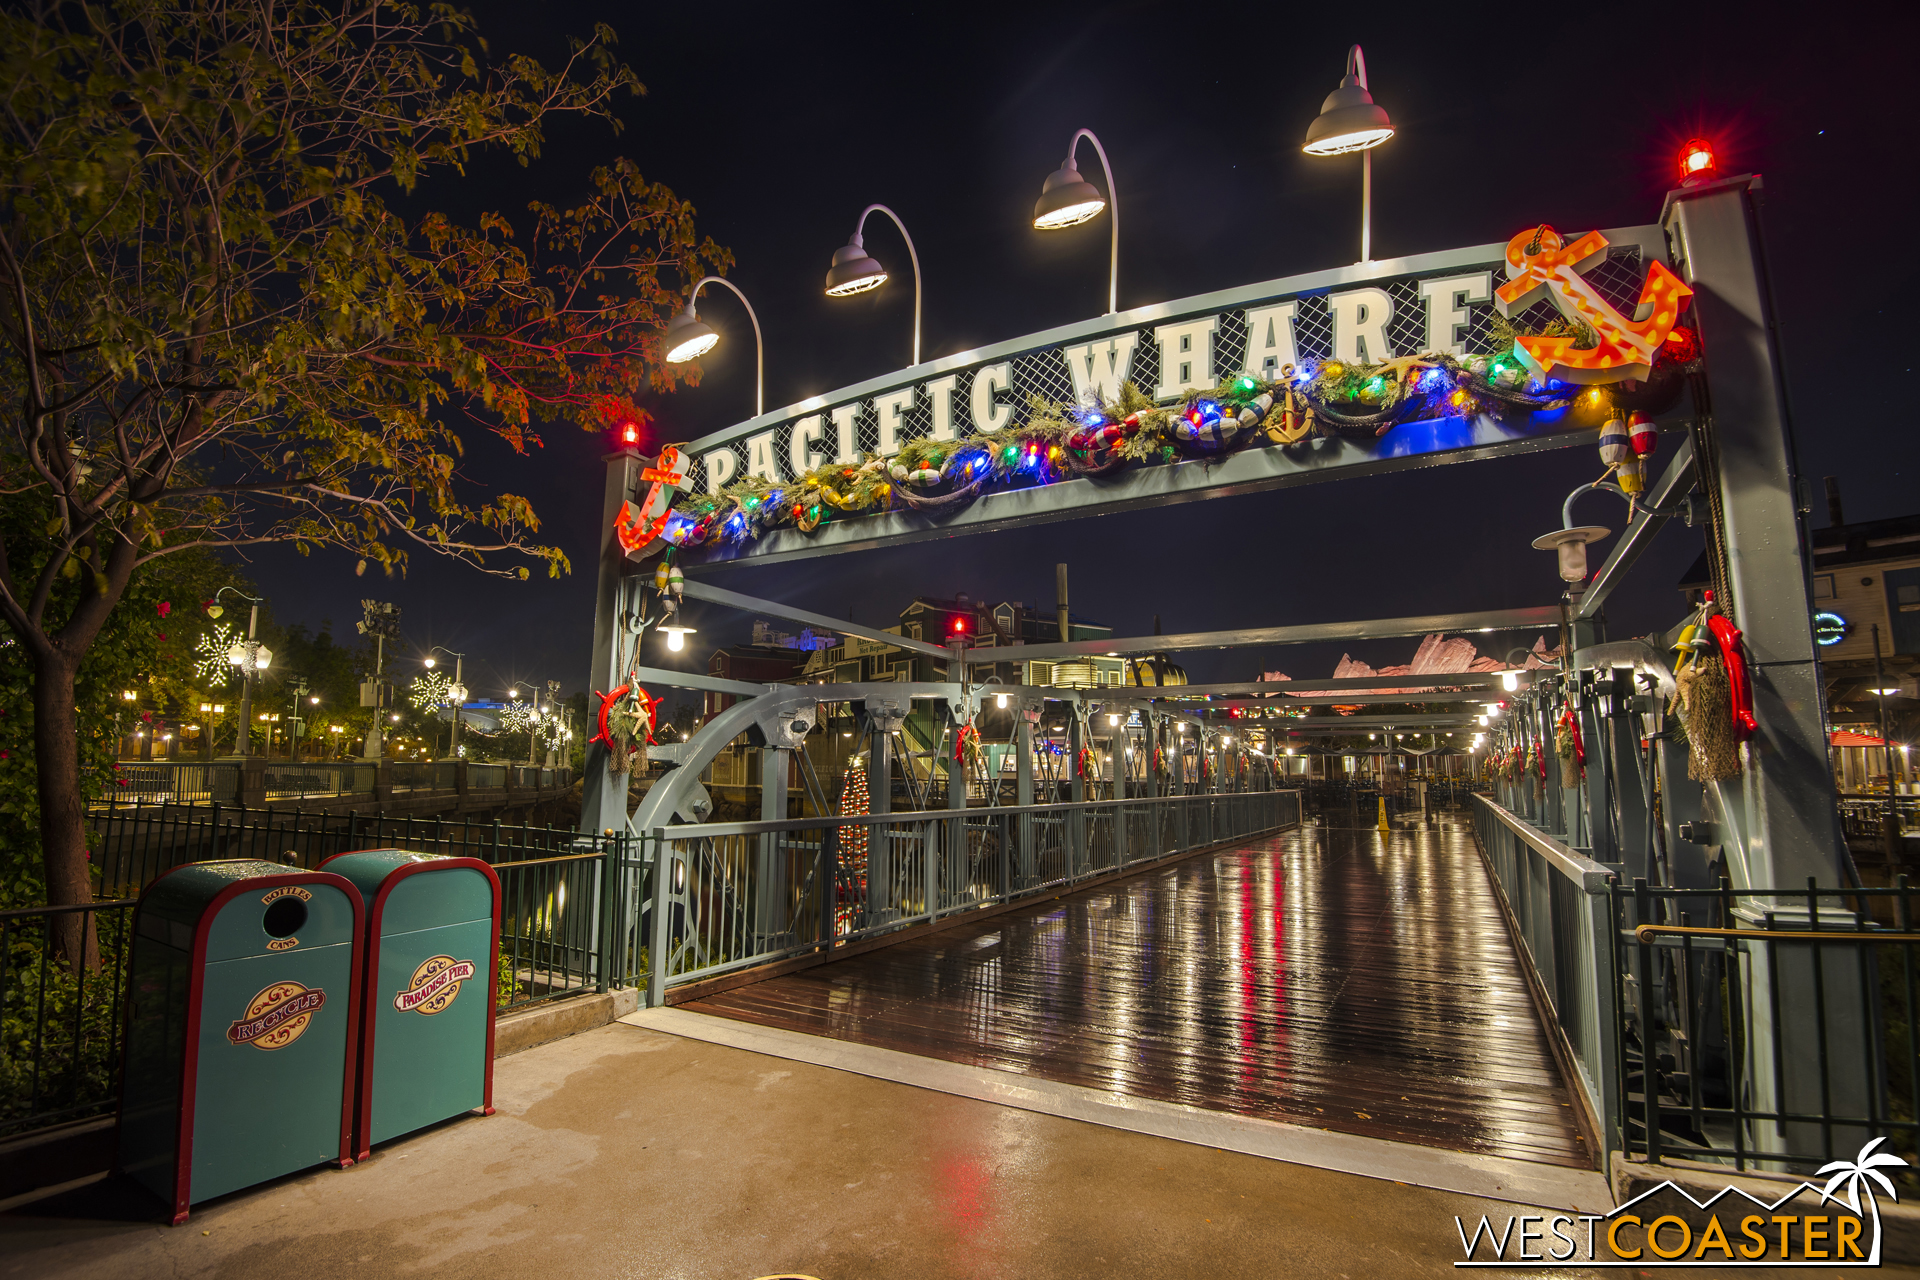  Last year, I happened to be at the parks during a drizzly evening, which yielded these nice photos. 